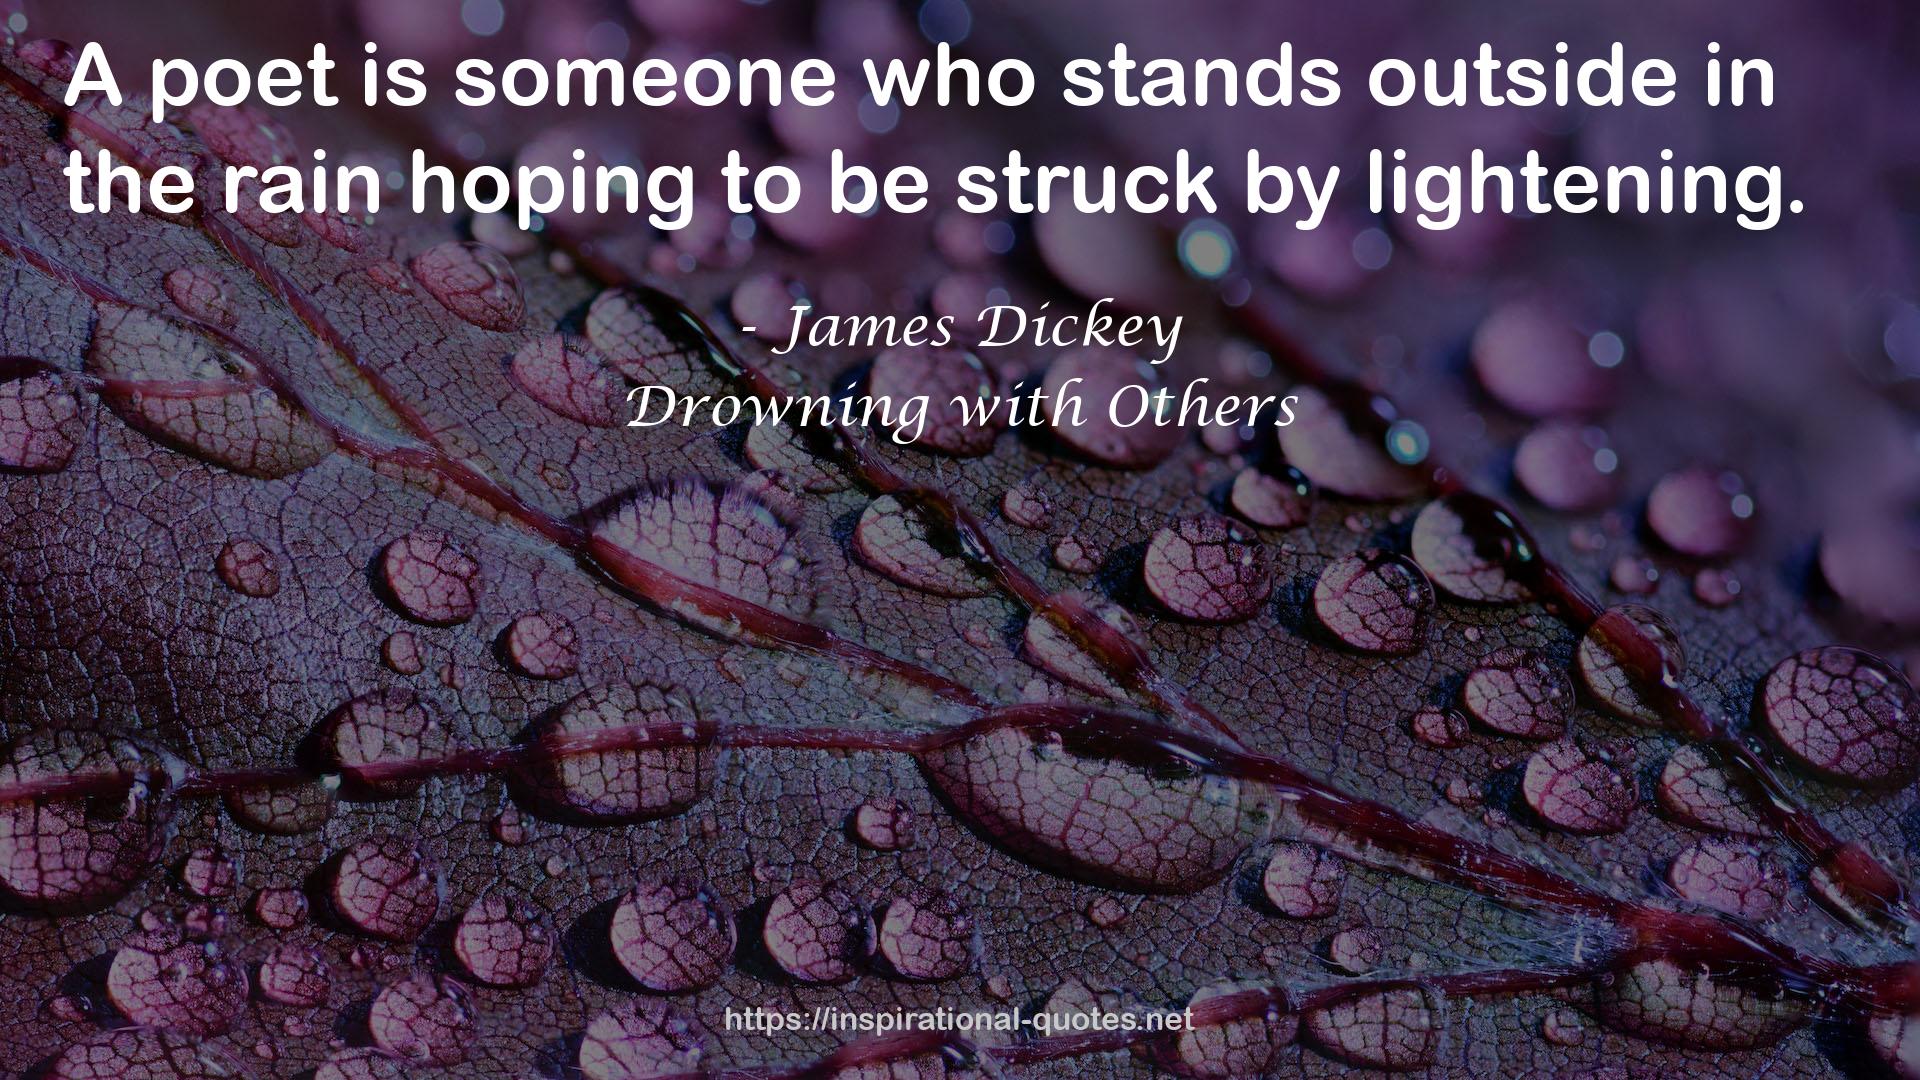 Drowning with Others QUOTES